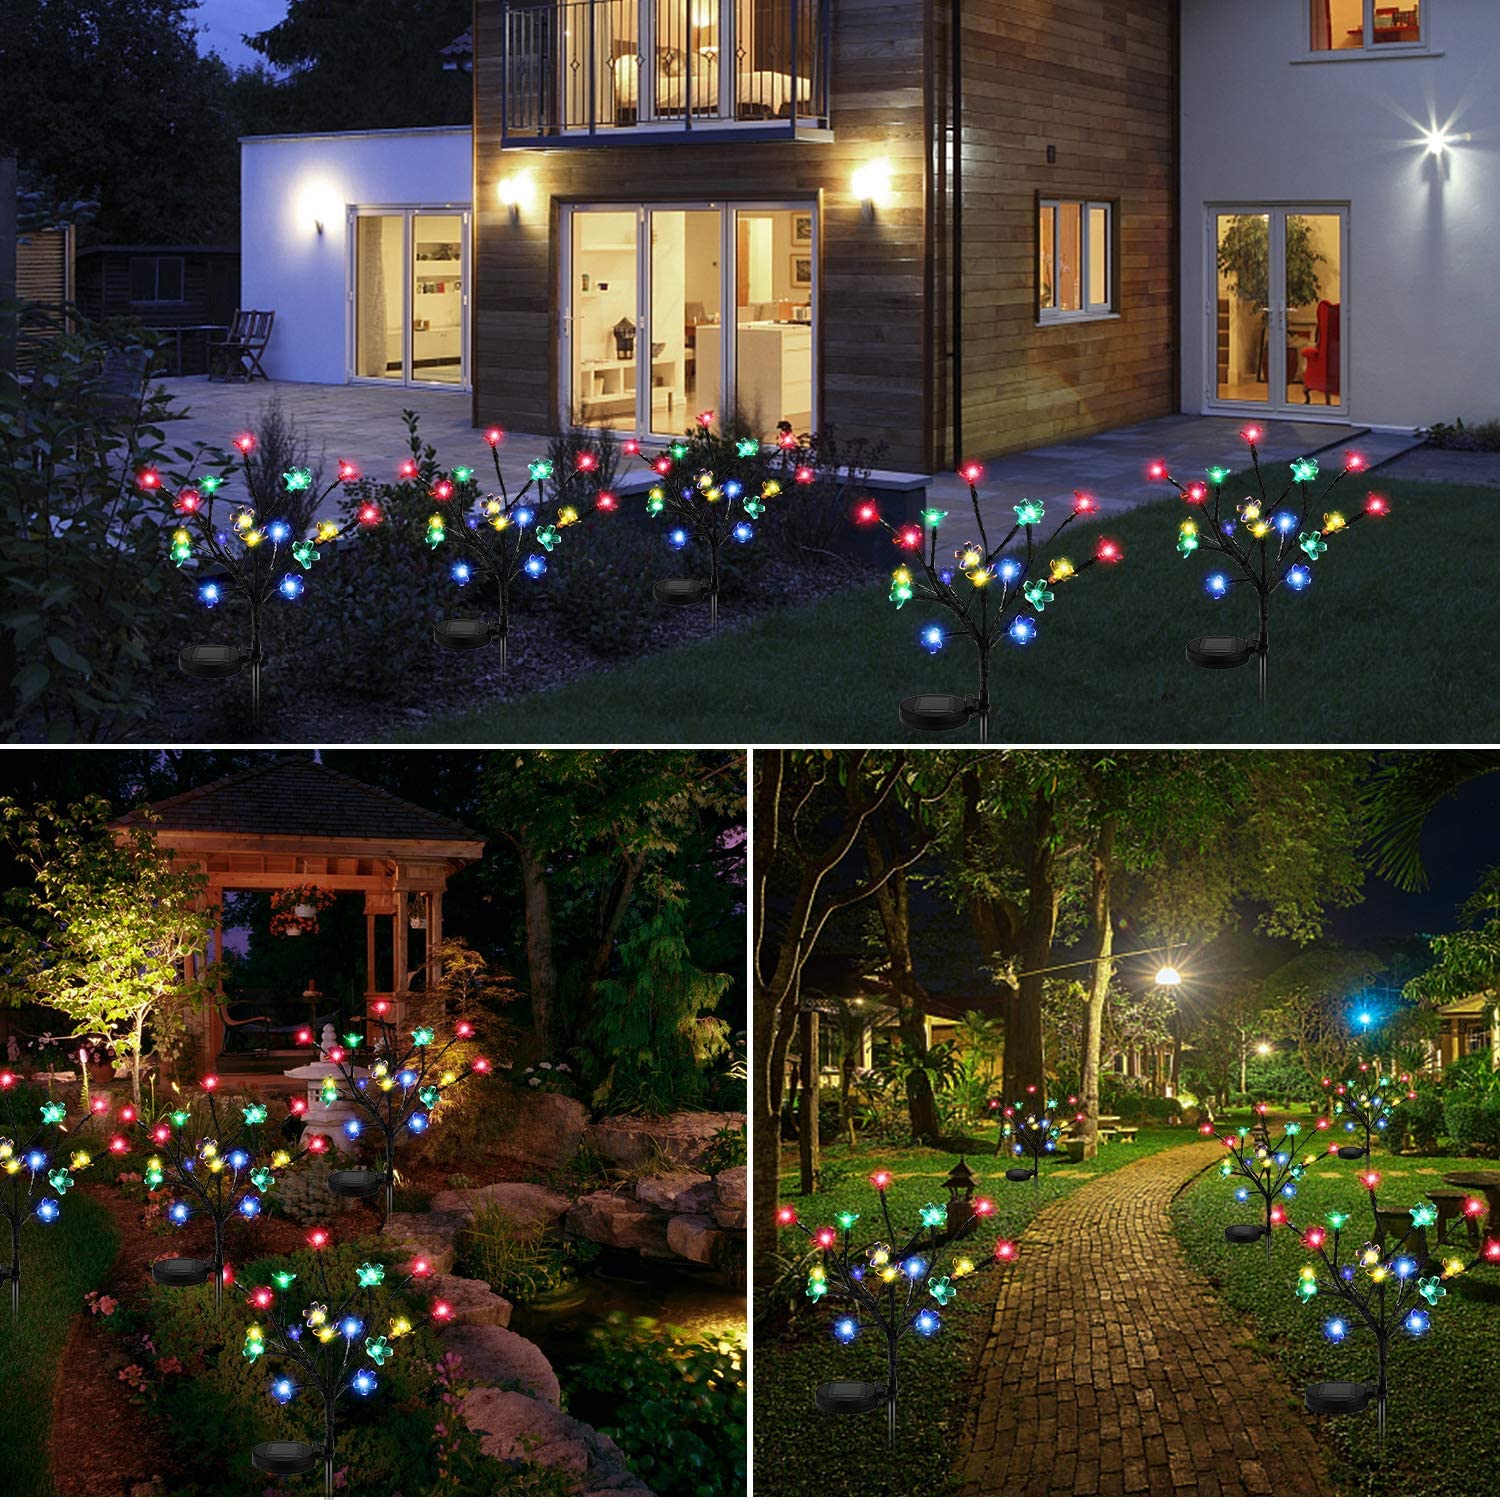 Garden Solar Lights Outdoor Decorative - LED Solar Powered Fairy Landscape Tree Lights,Beautiful Solar Flower Lights for Pathway Patio Yard Deck Walkway|Christmas Party Decor 2Pack - image 2 of 8